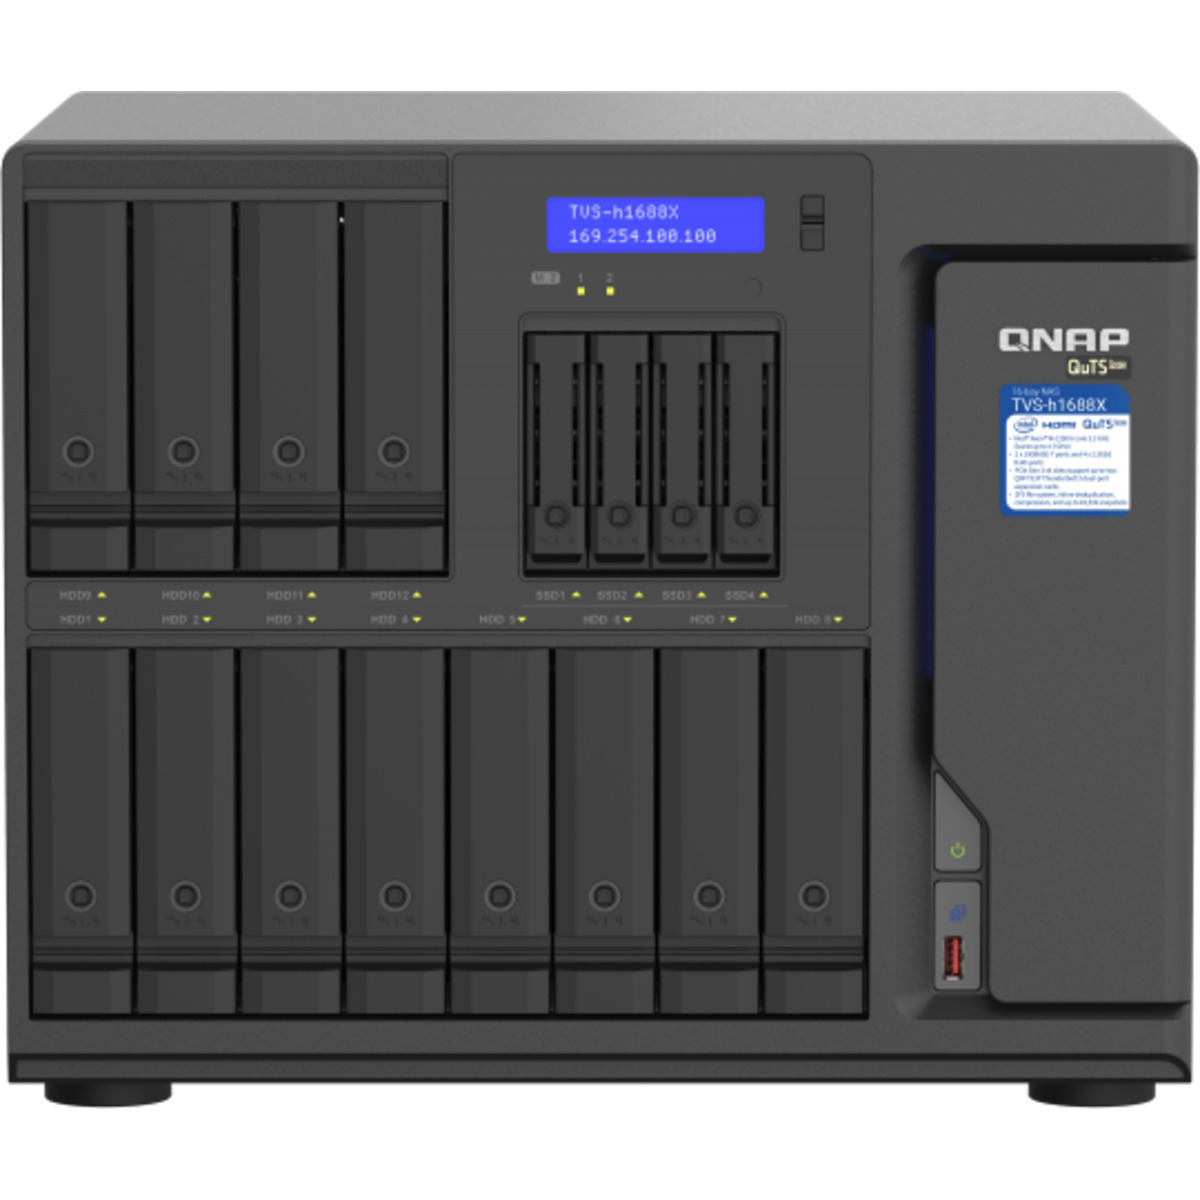 QNAP TVS-h1688X QuTS hero NAS 112tb 12+4-Bay Desktop Multimedia / Power User / Business NAS - Network Attached Storage Device 7x16tb Seagate IronWolf ST16000VN001 3.5 7200rpm SATA 6Gb/s HDD NAS Class Drives Installed - Burn-In Tested TVS-h1688X QuTS hero NAS